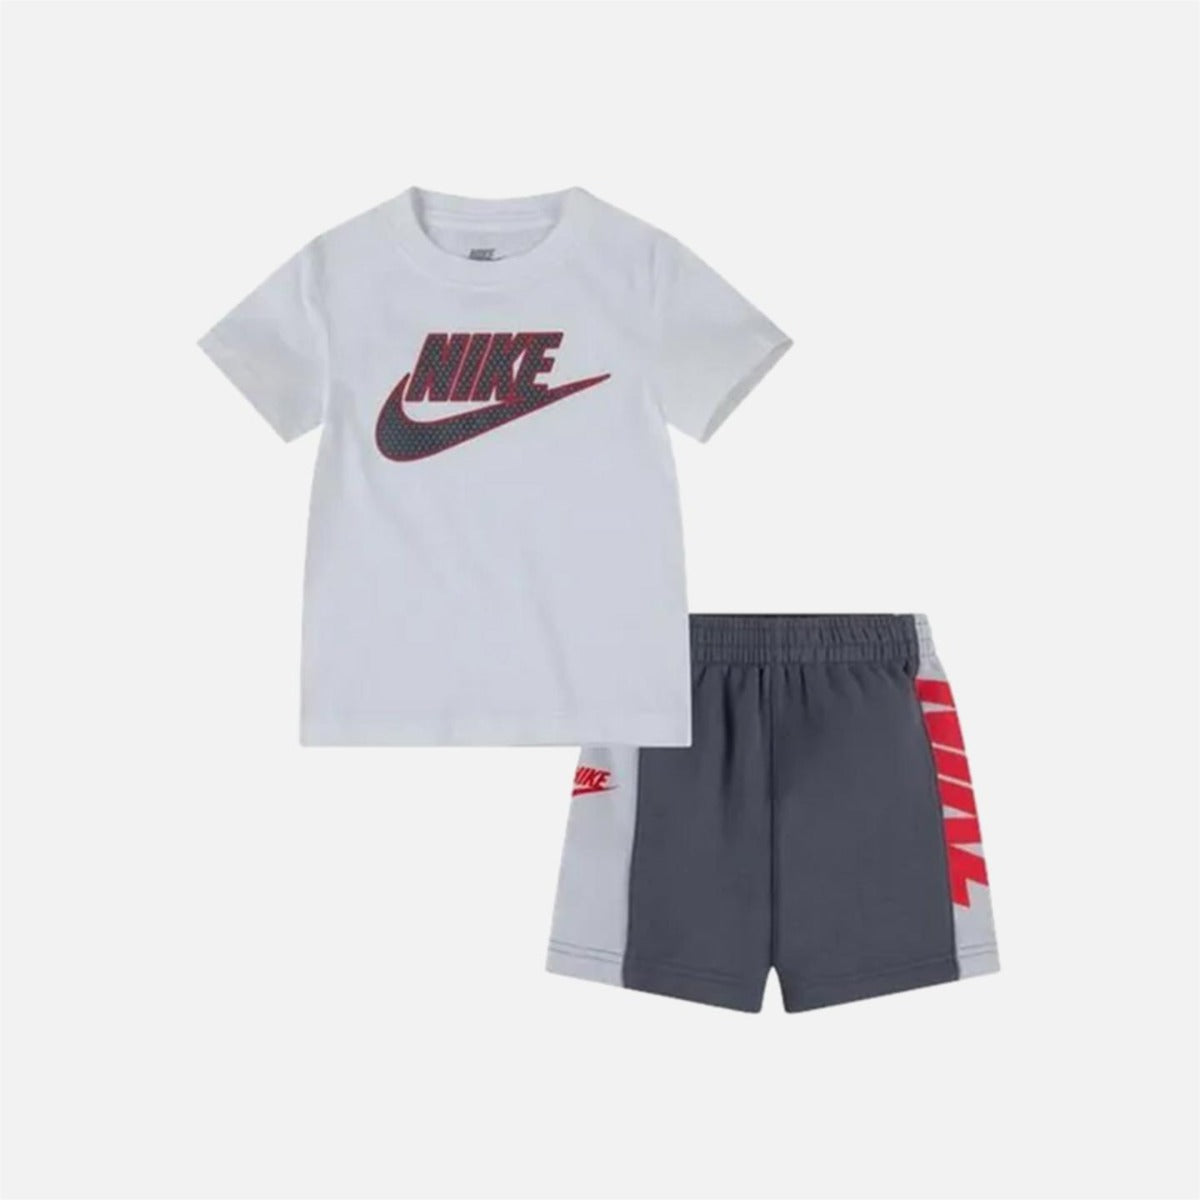 Nike T-Shirt & Shorts Set, Complete Outfit for Kids